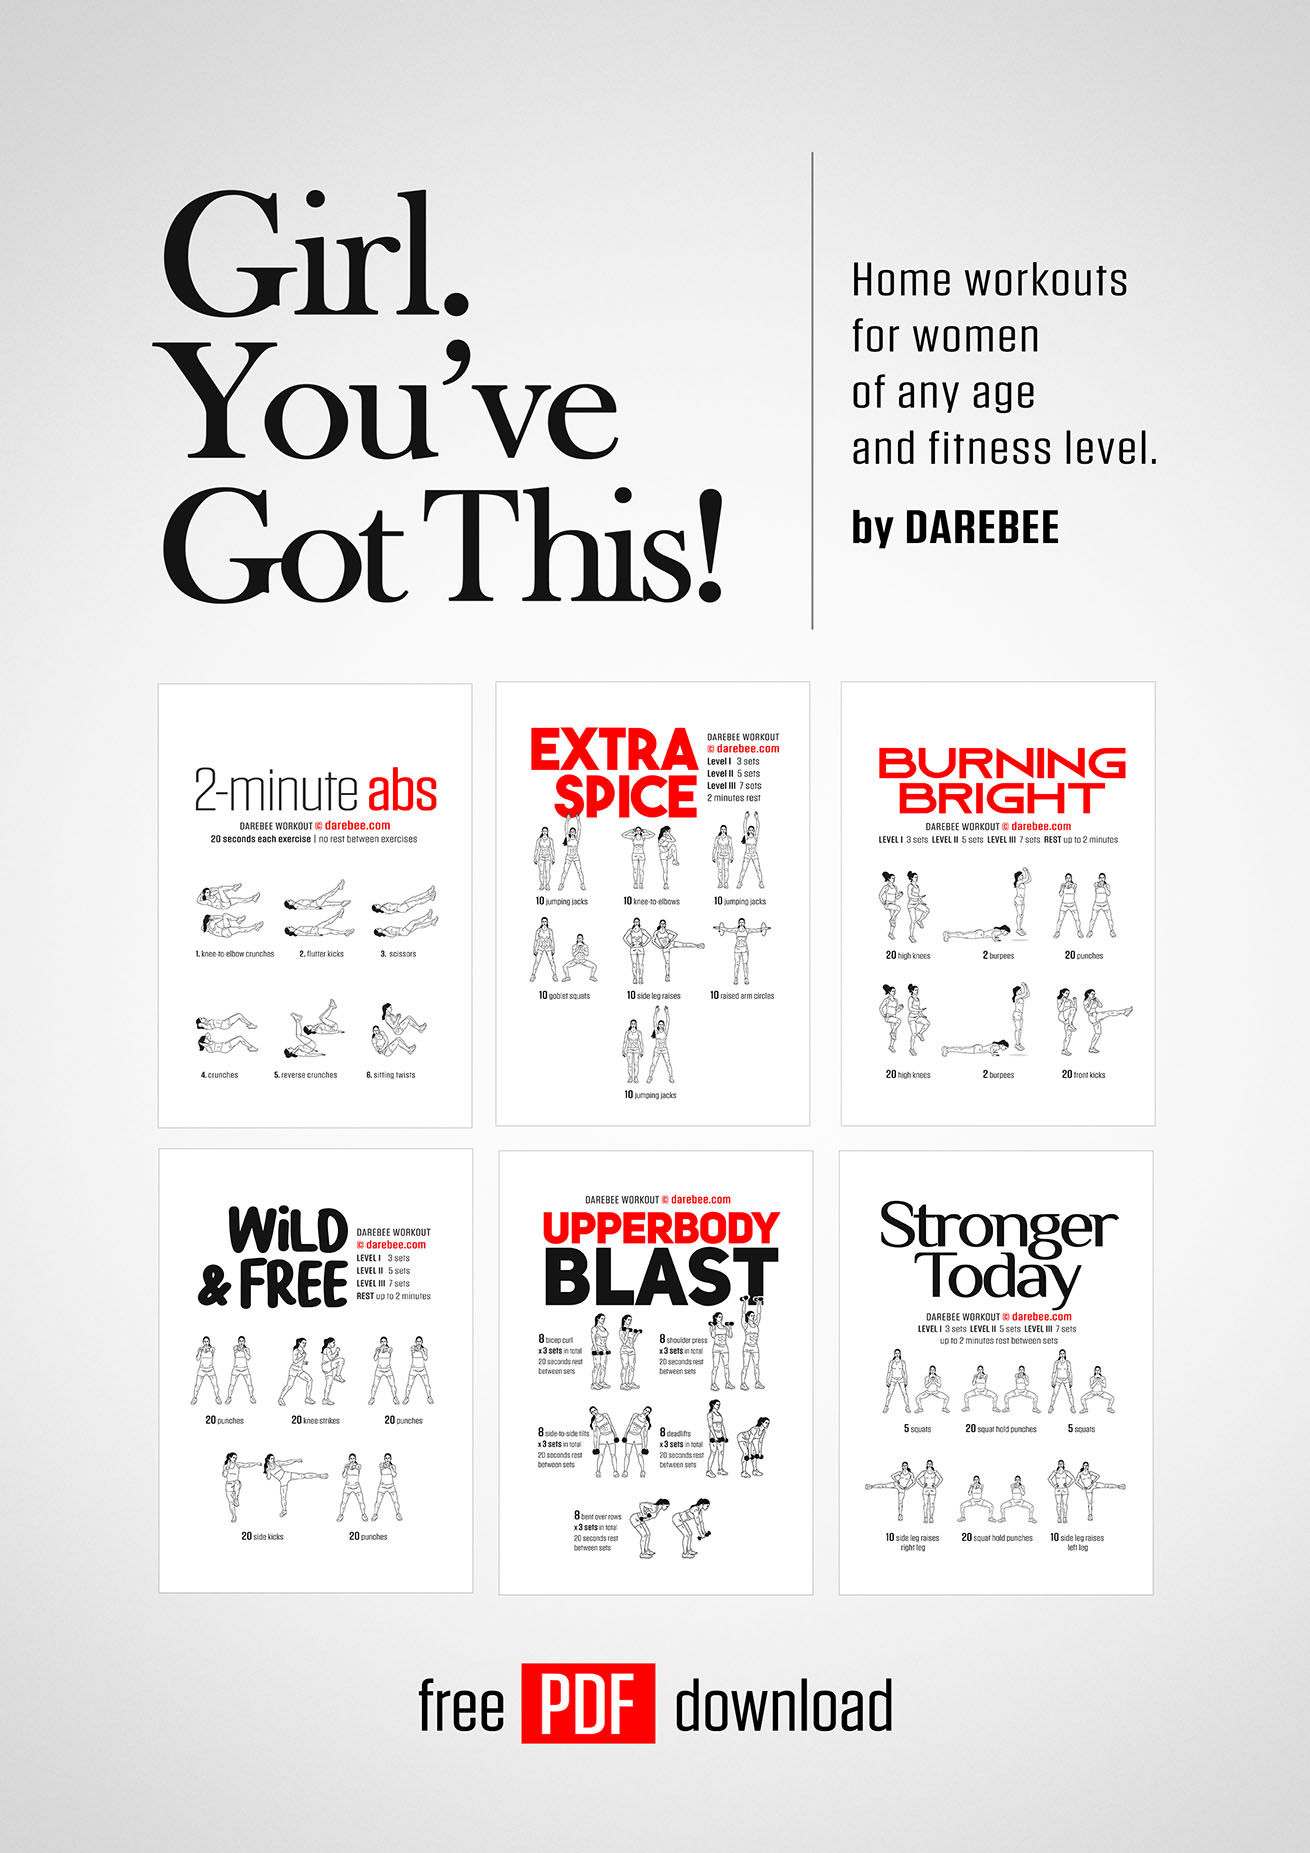 Girl, You've Got This! is a DAREBEE fitness book that contains over 150 workouts specifically designed to help you get fitter, faster, at home.